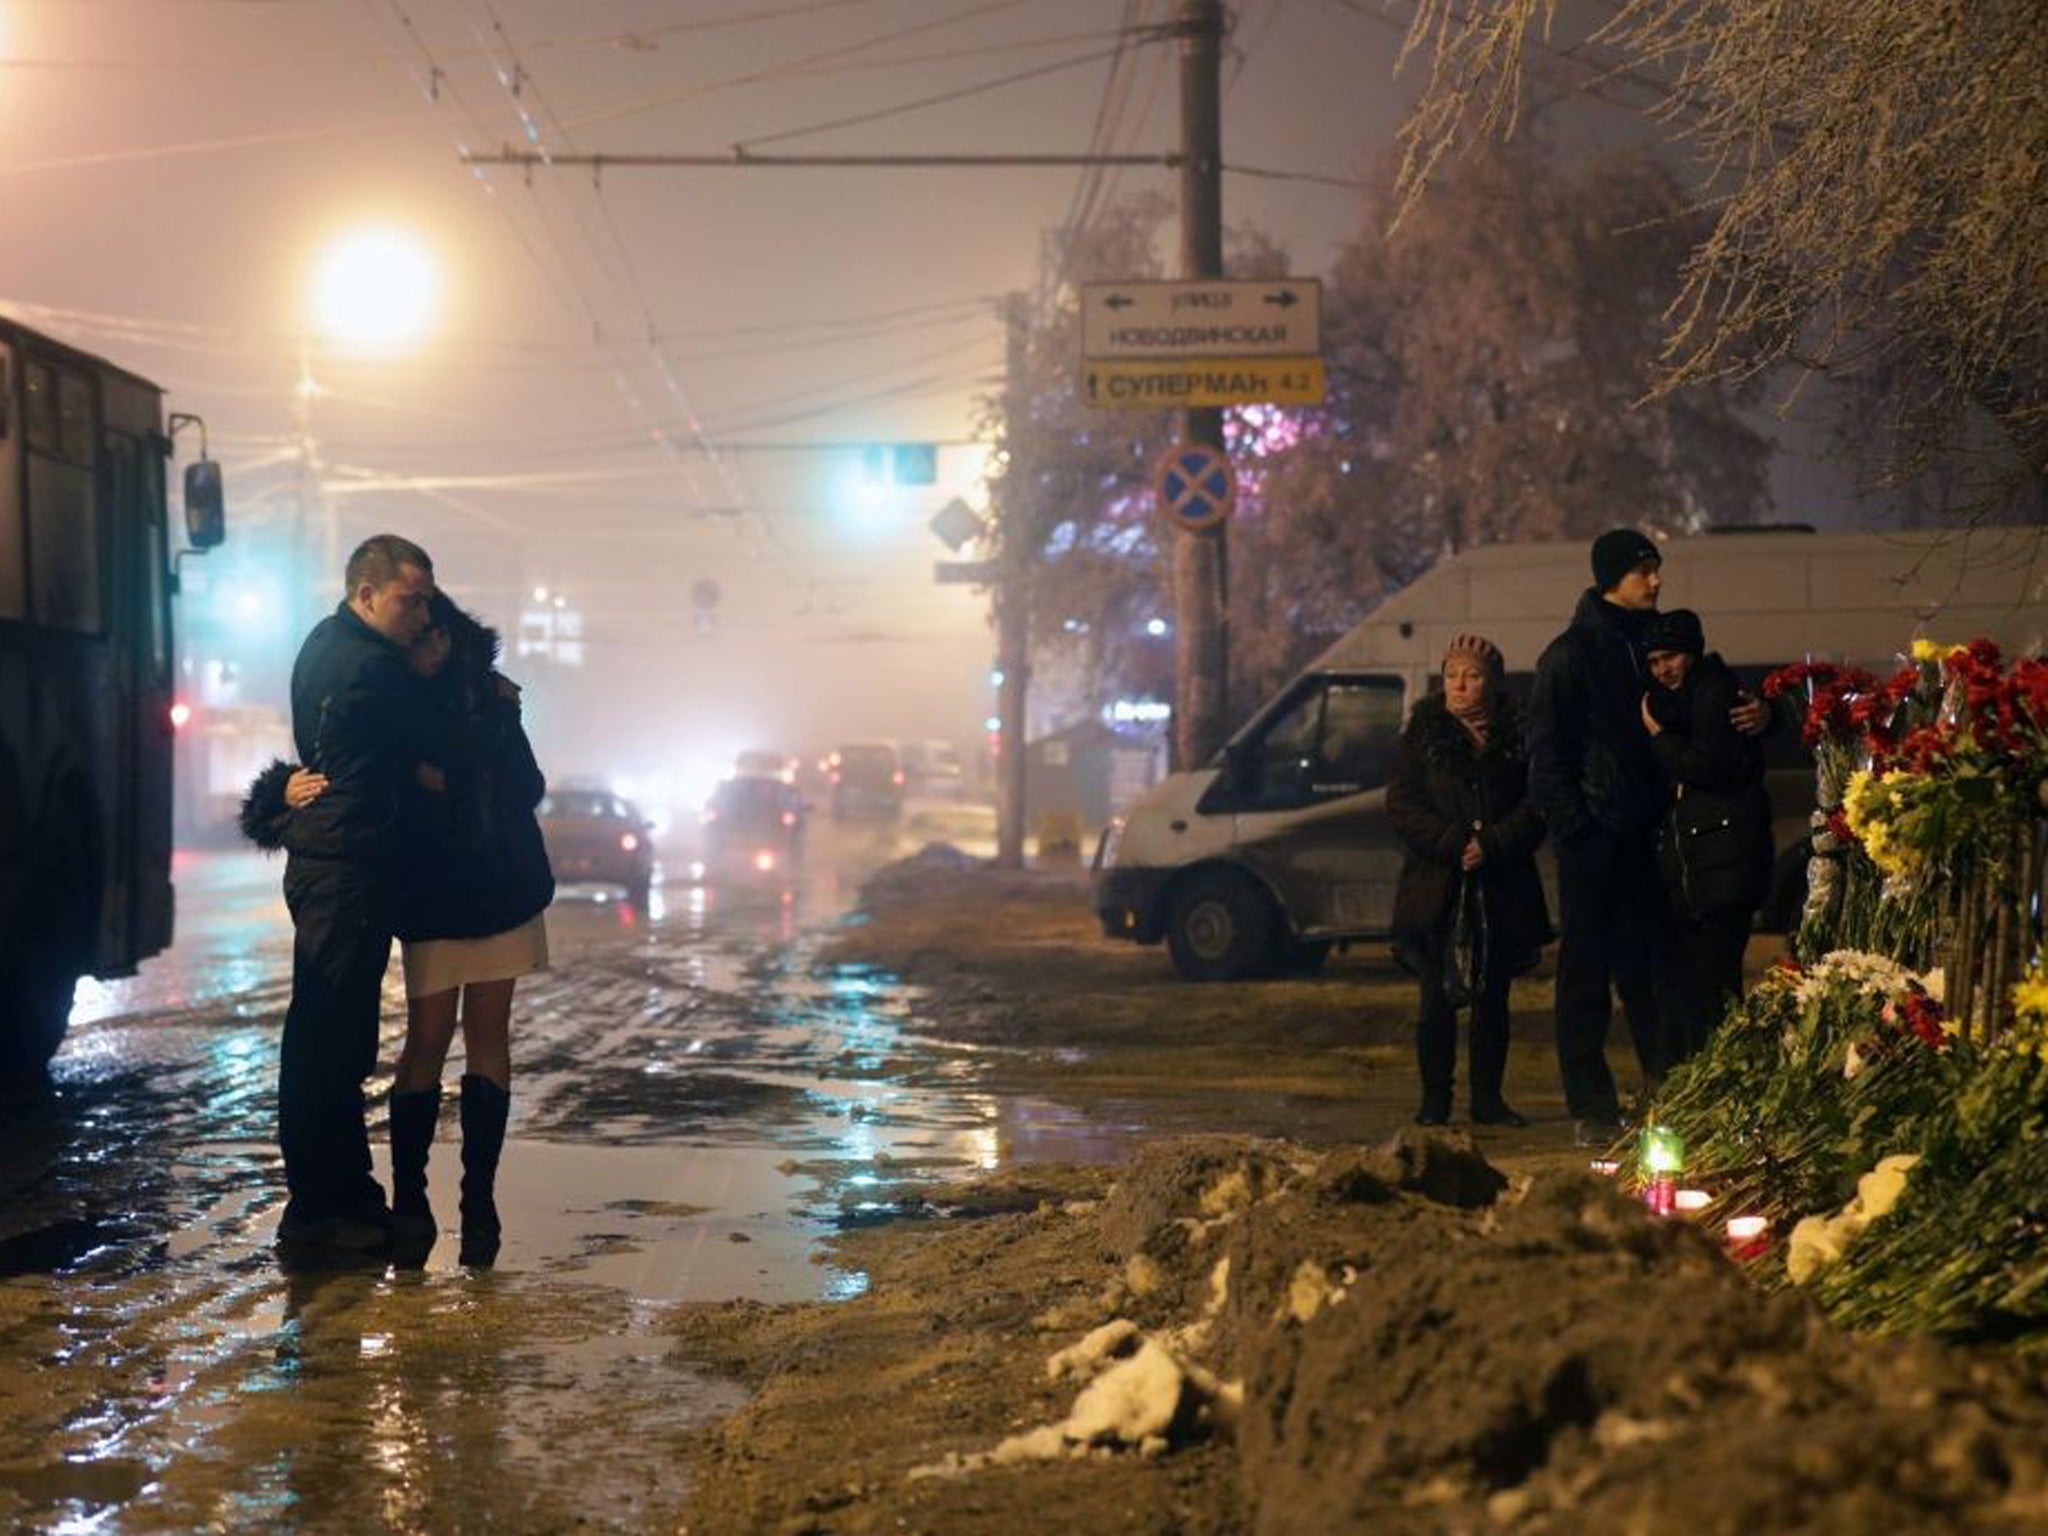 Russian people grieve at the site of the second terrorist explosion, which happened on a trolleybus, at a street in Volgograd